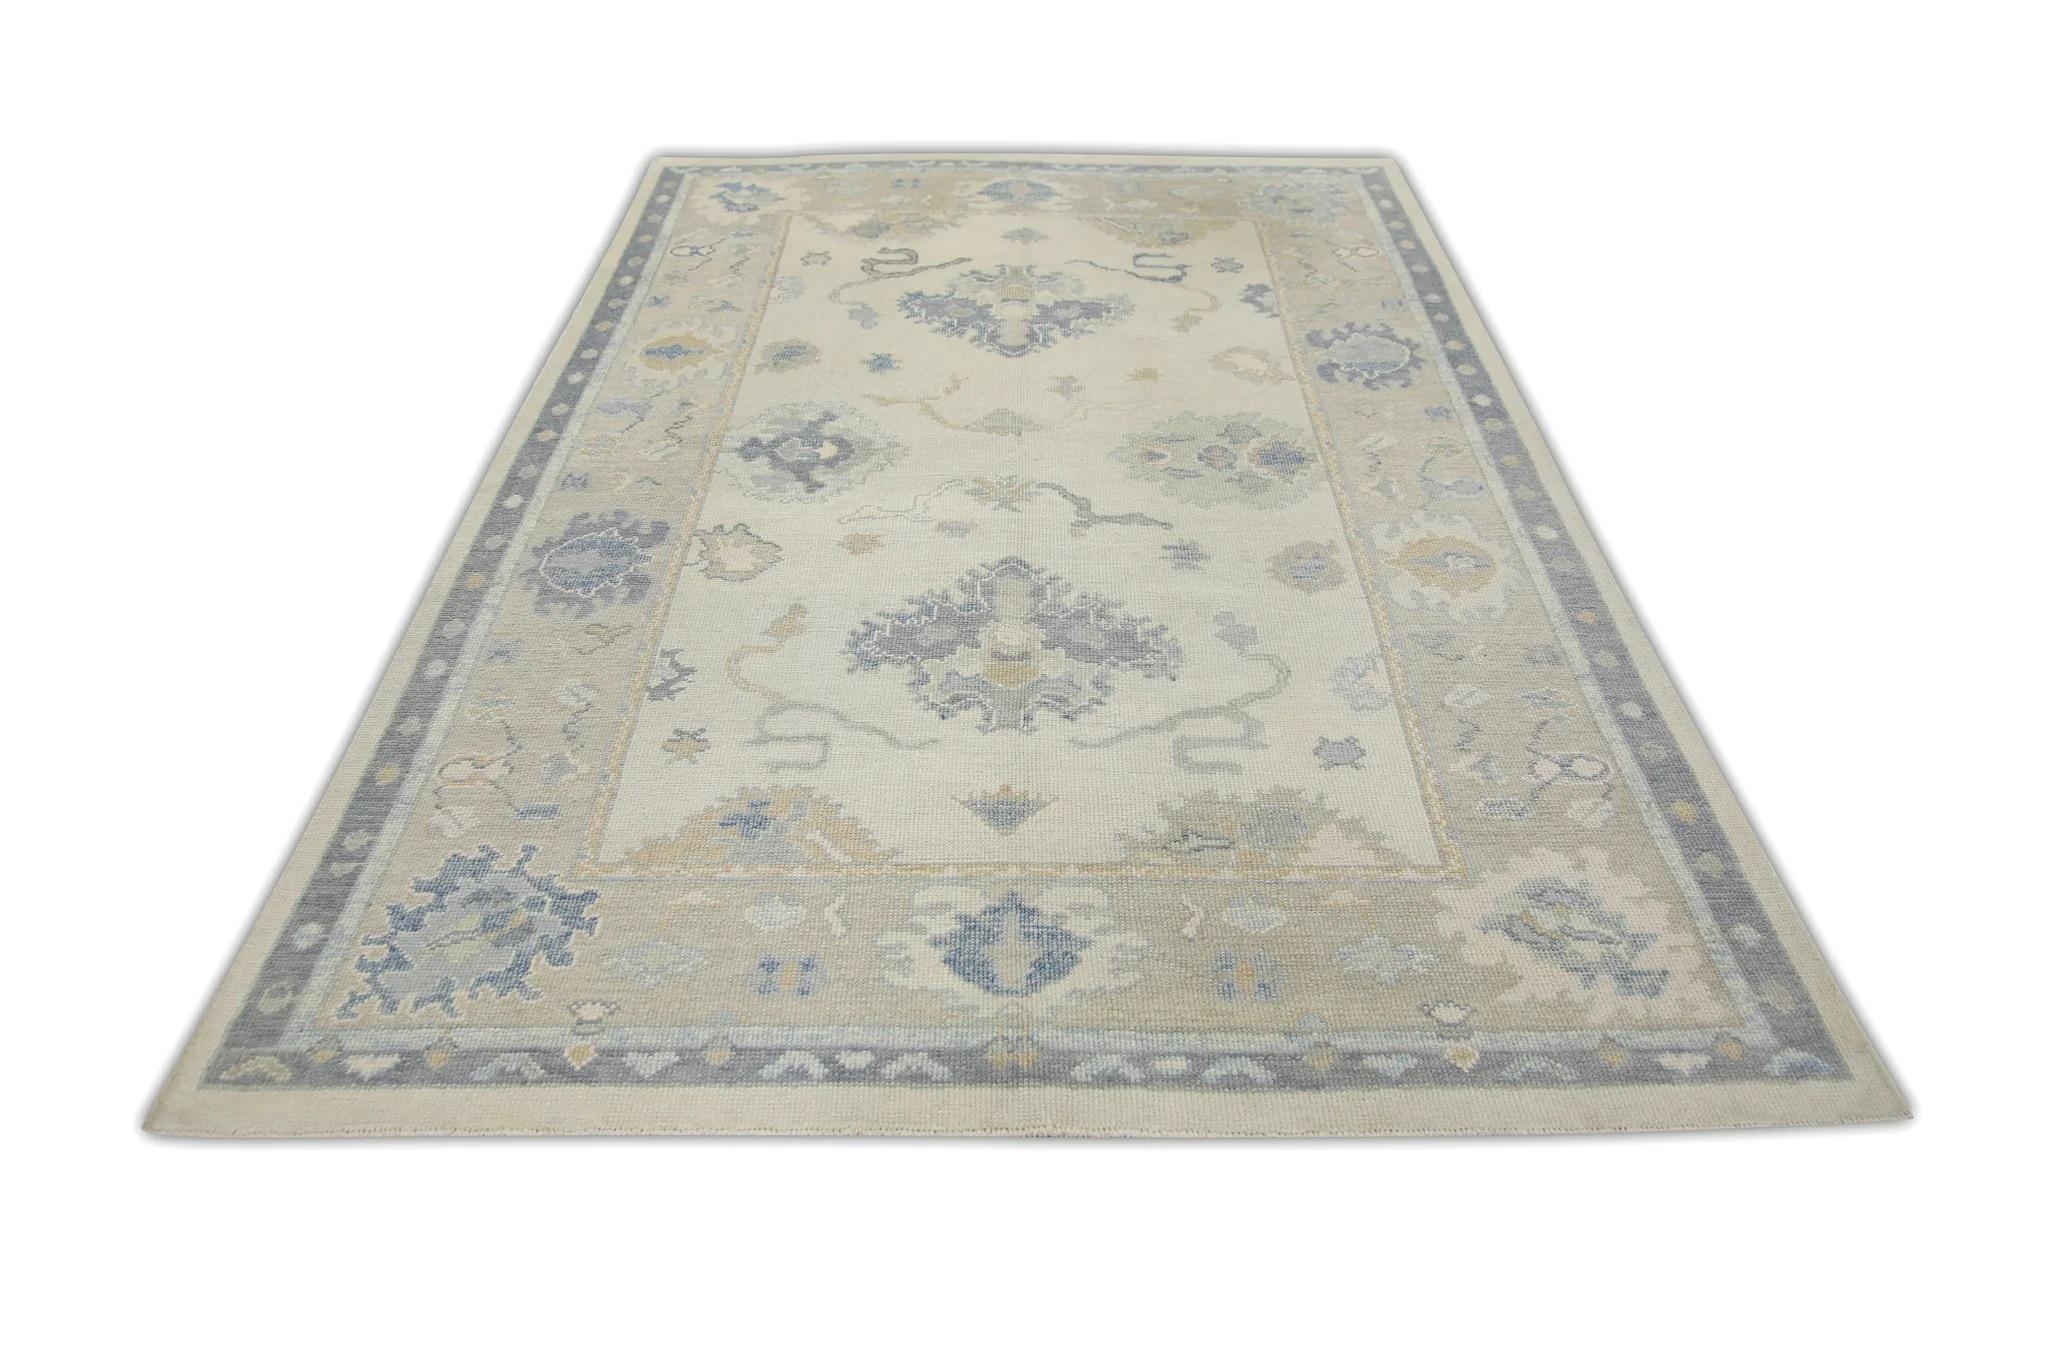 Taupe and Blue Floral Handwoven Wool Turkish Oushak Rug 6' x 8'9